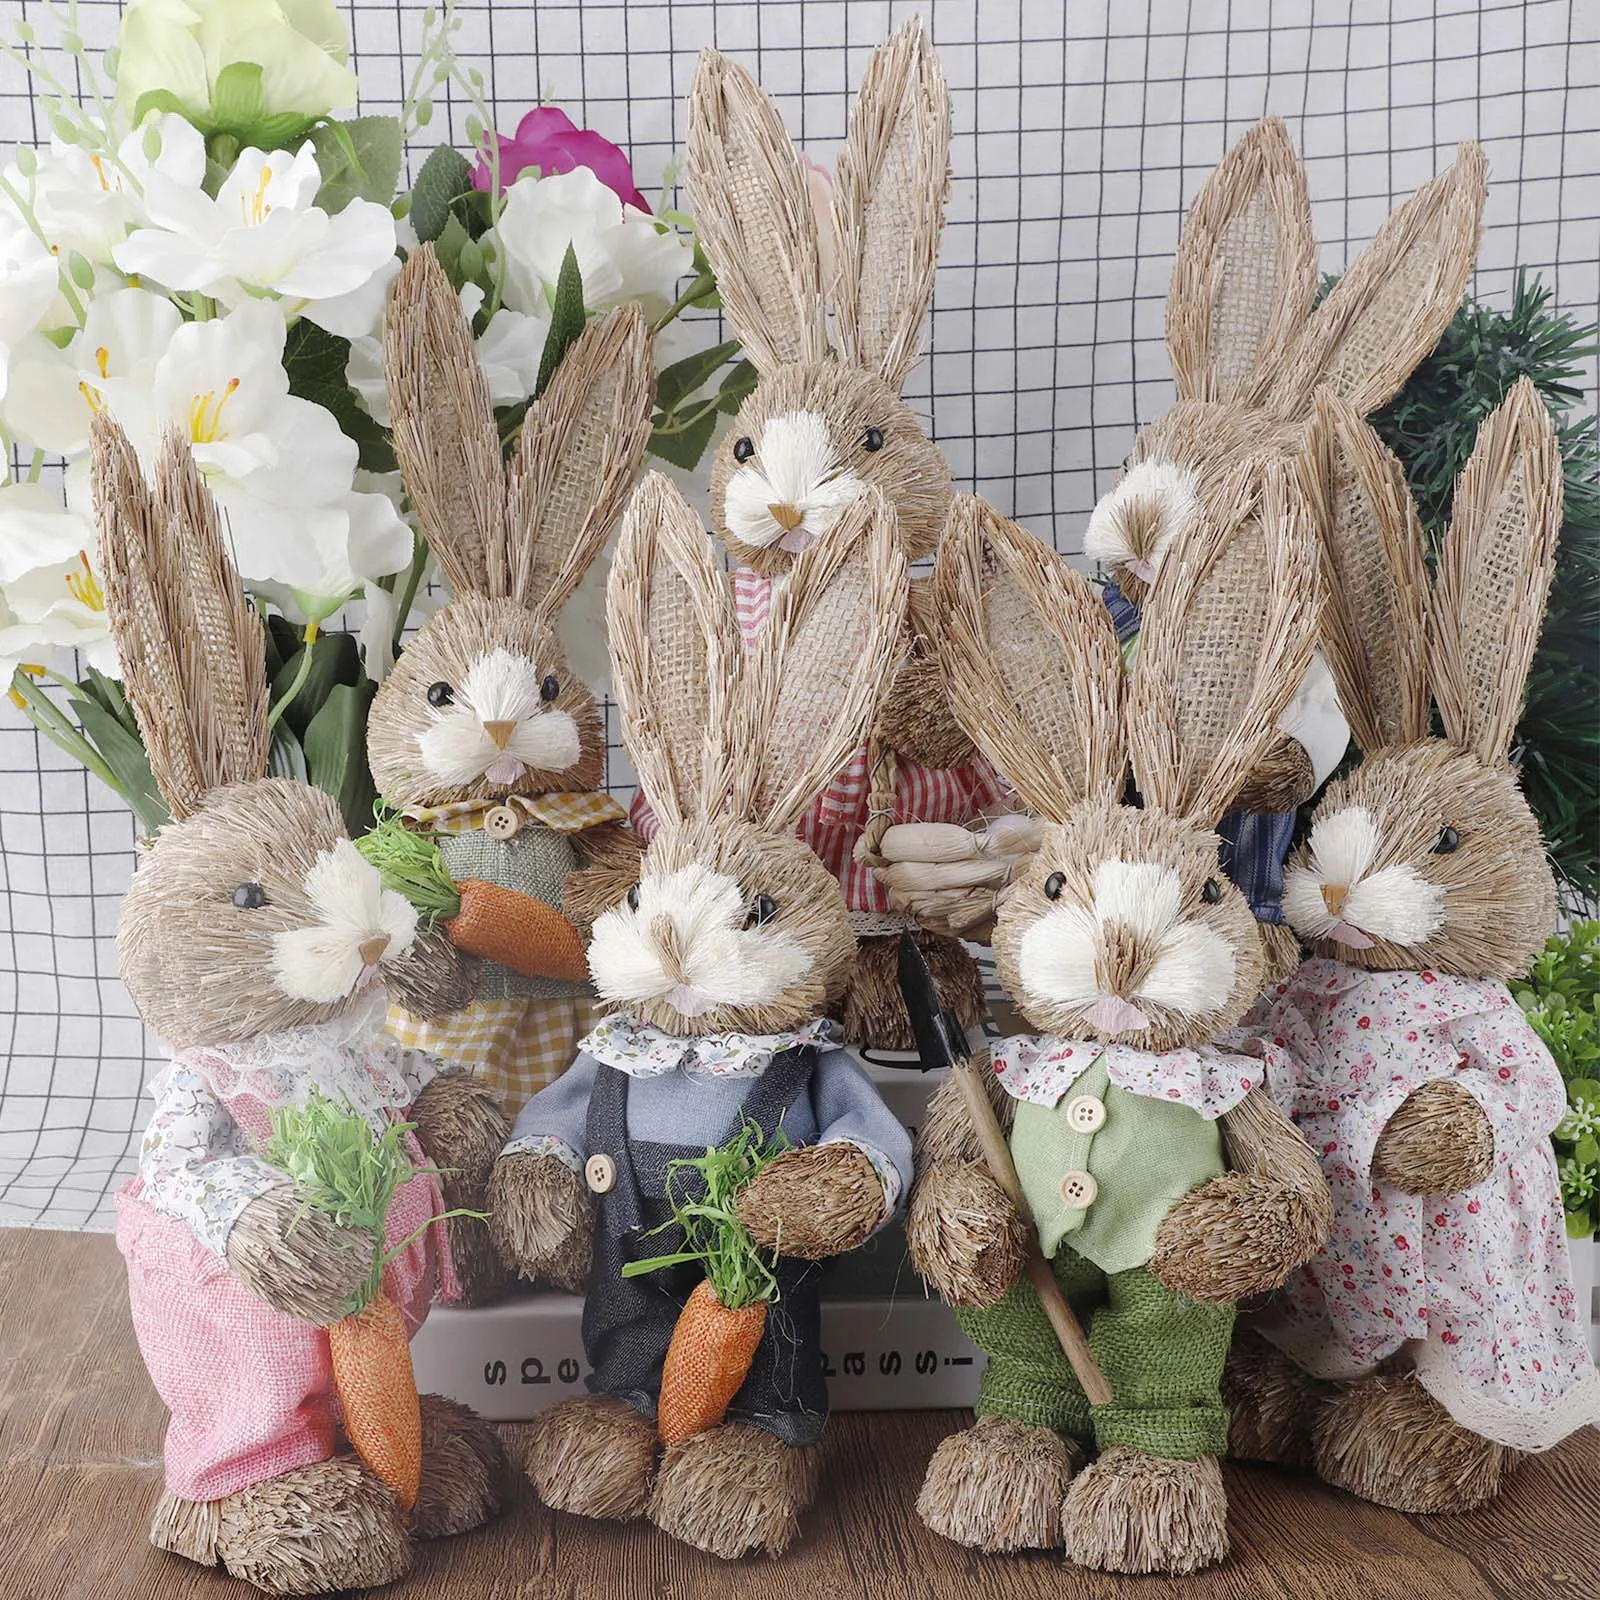 PRETYZOOM 3pcs Handmade Straw Rabbit Easter Desktop Decor Easter Straw  Desktop Rabbit Decor Easter Party Supplies Woven Straw Bunny Home  Decorations